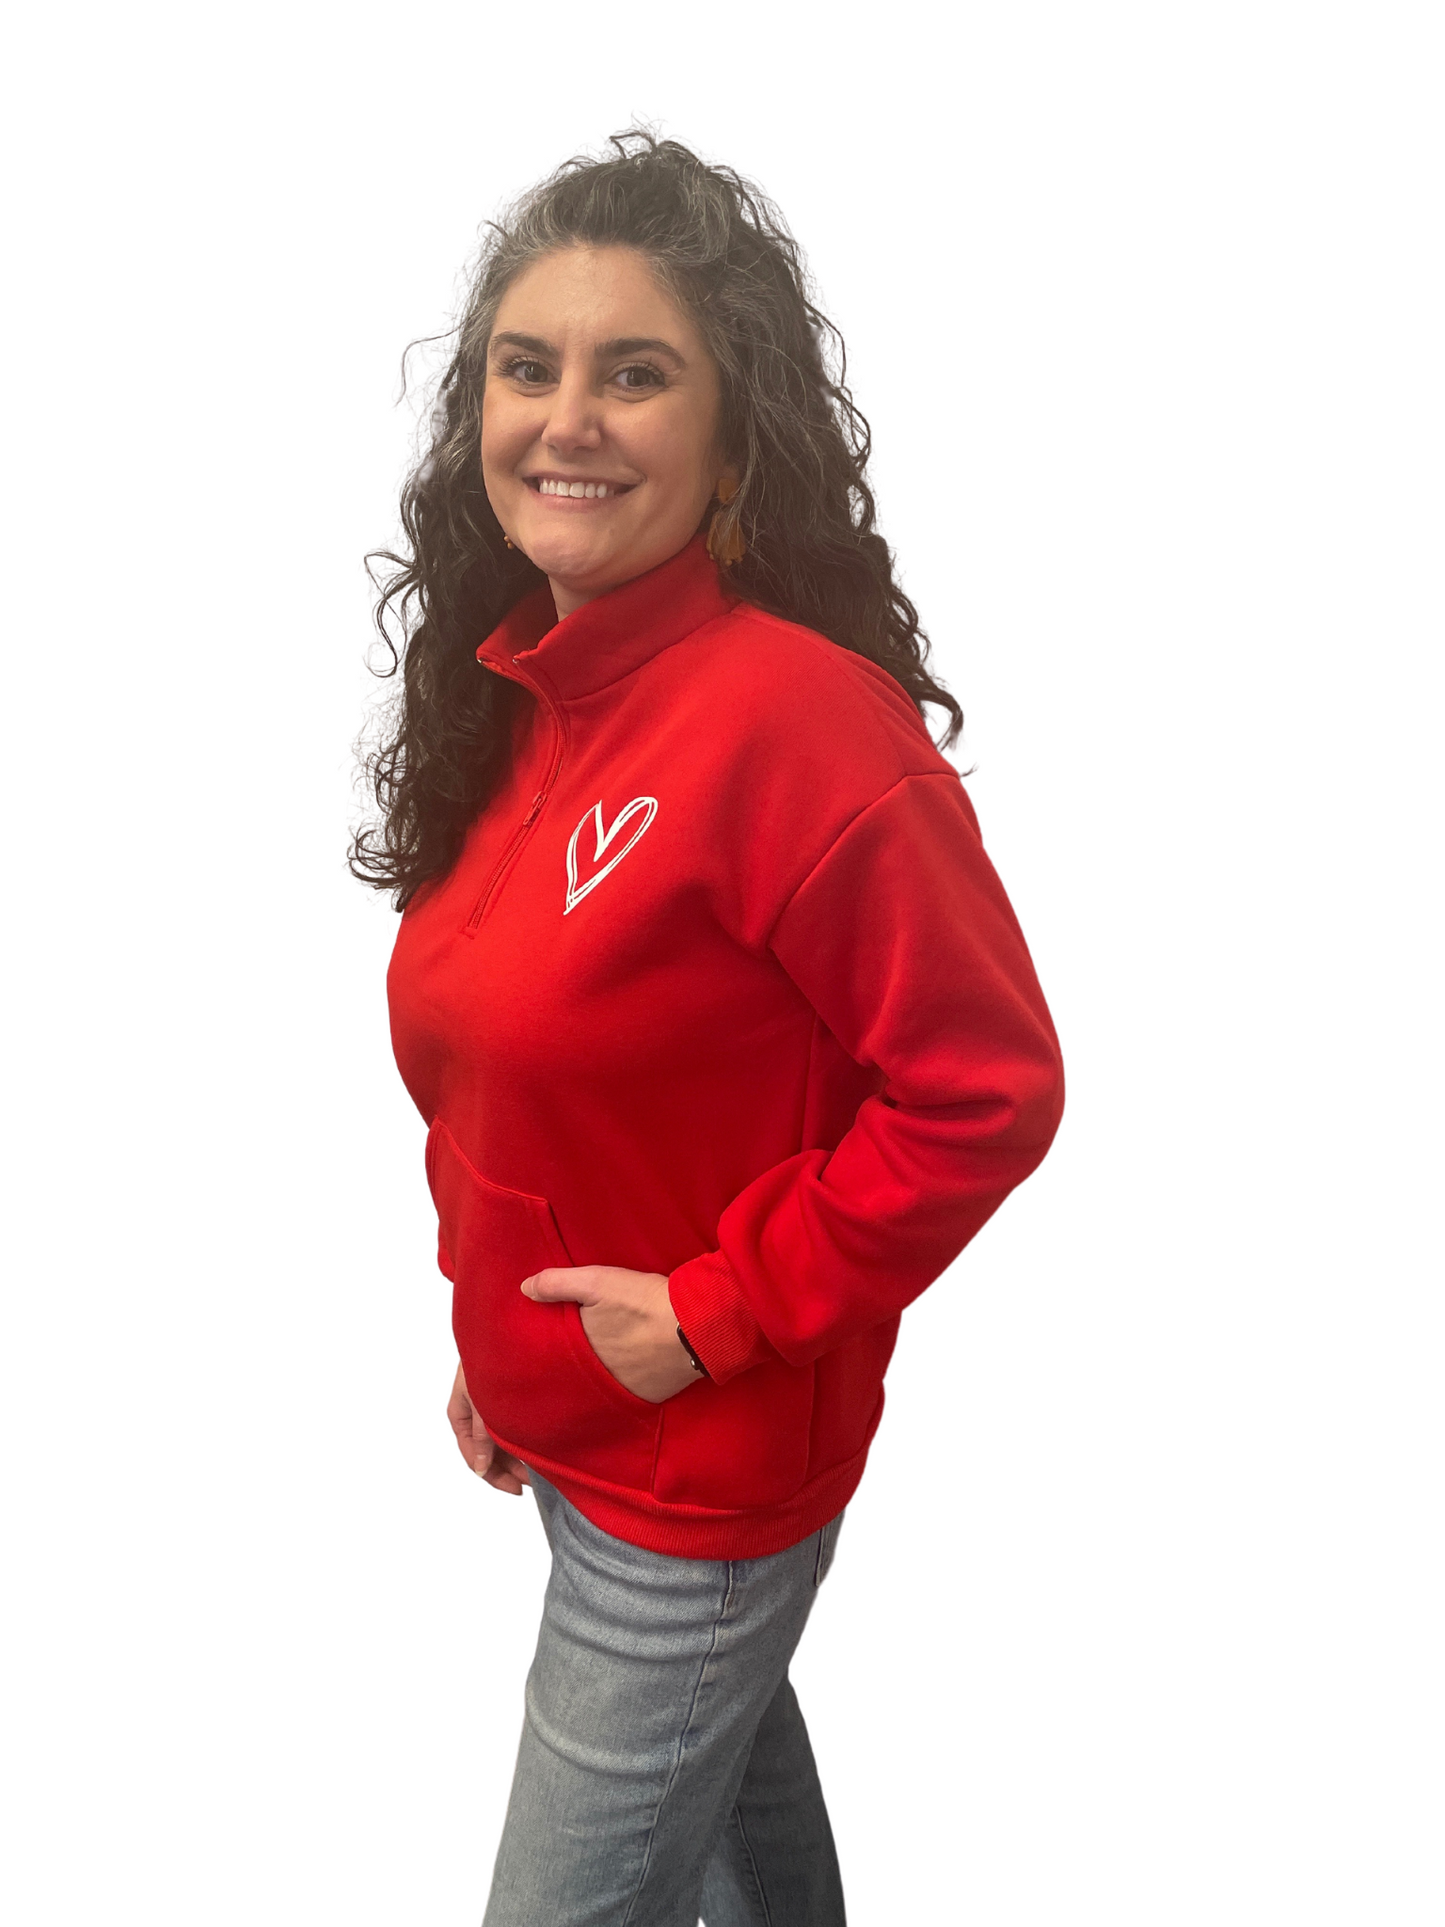 100% Polyester  Get ready to fall in love with this sweatshirt! The bold red color and half zip front adorned with a playful scribble heart adds that special touch touch to your wardrobe. It's a must-have for all seasons!